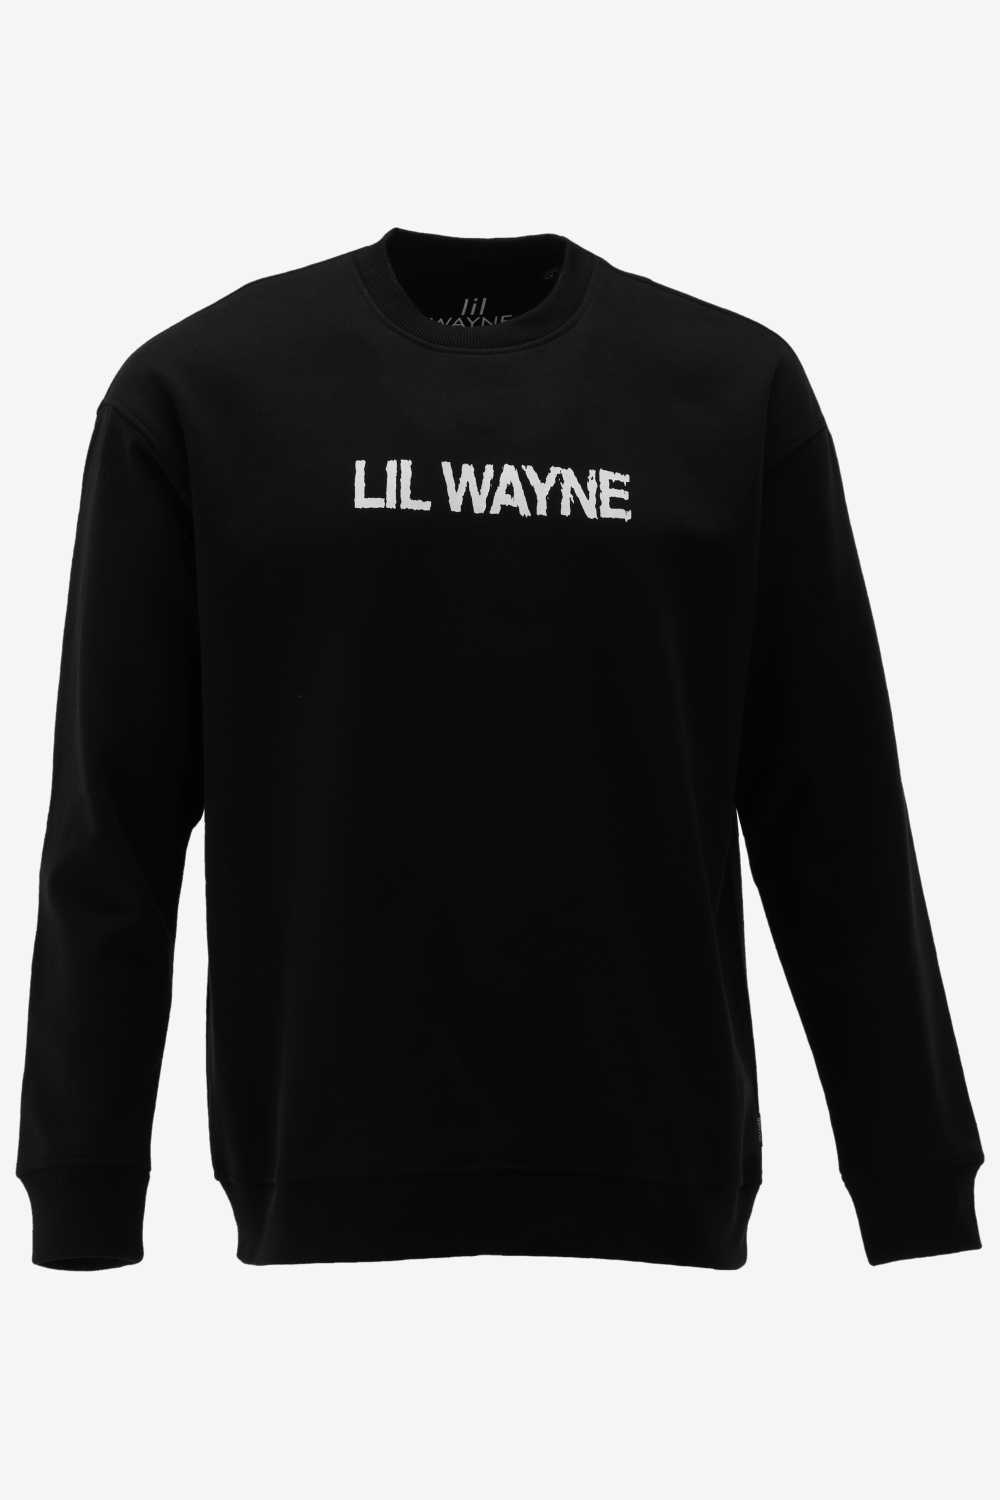 Only Sons Sweater LILWAYNE